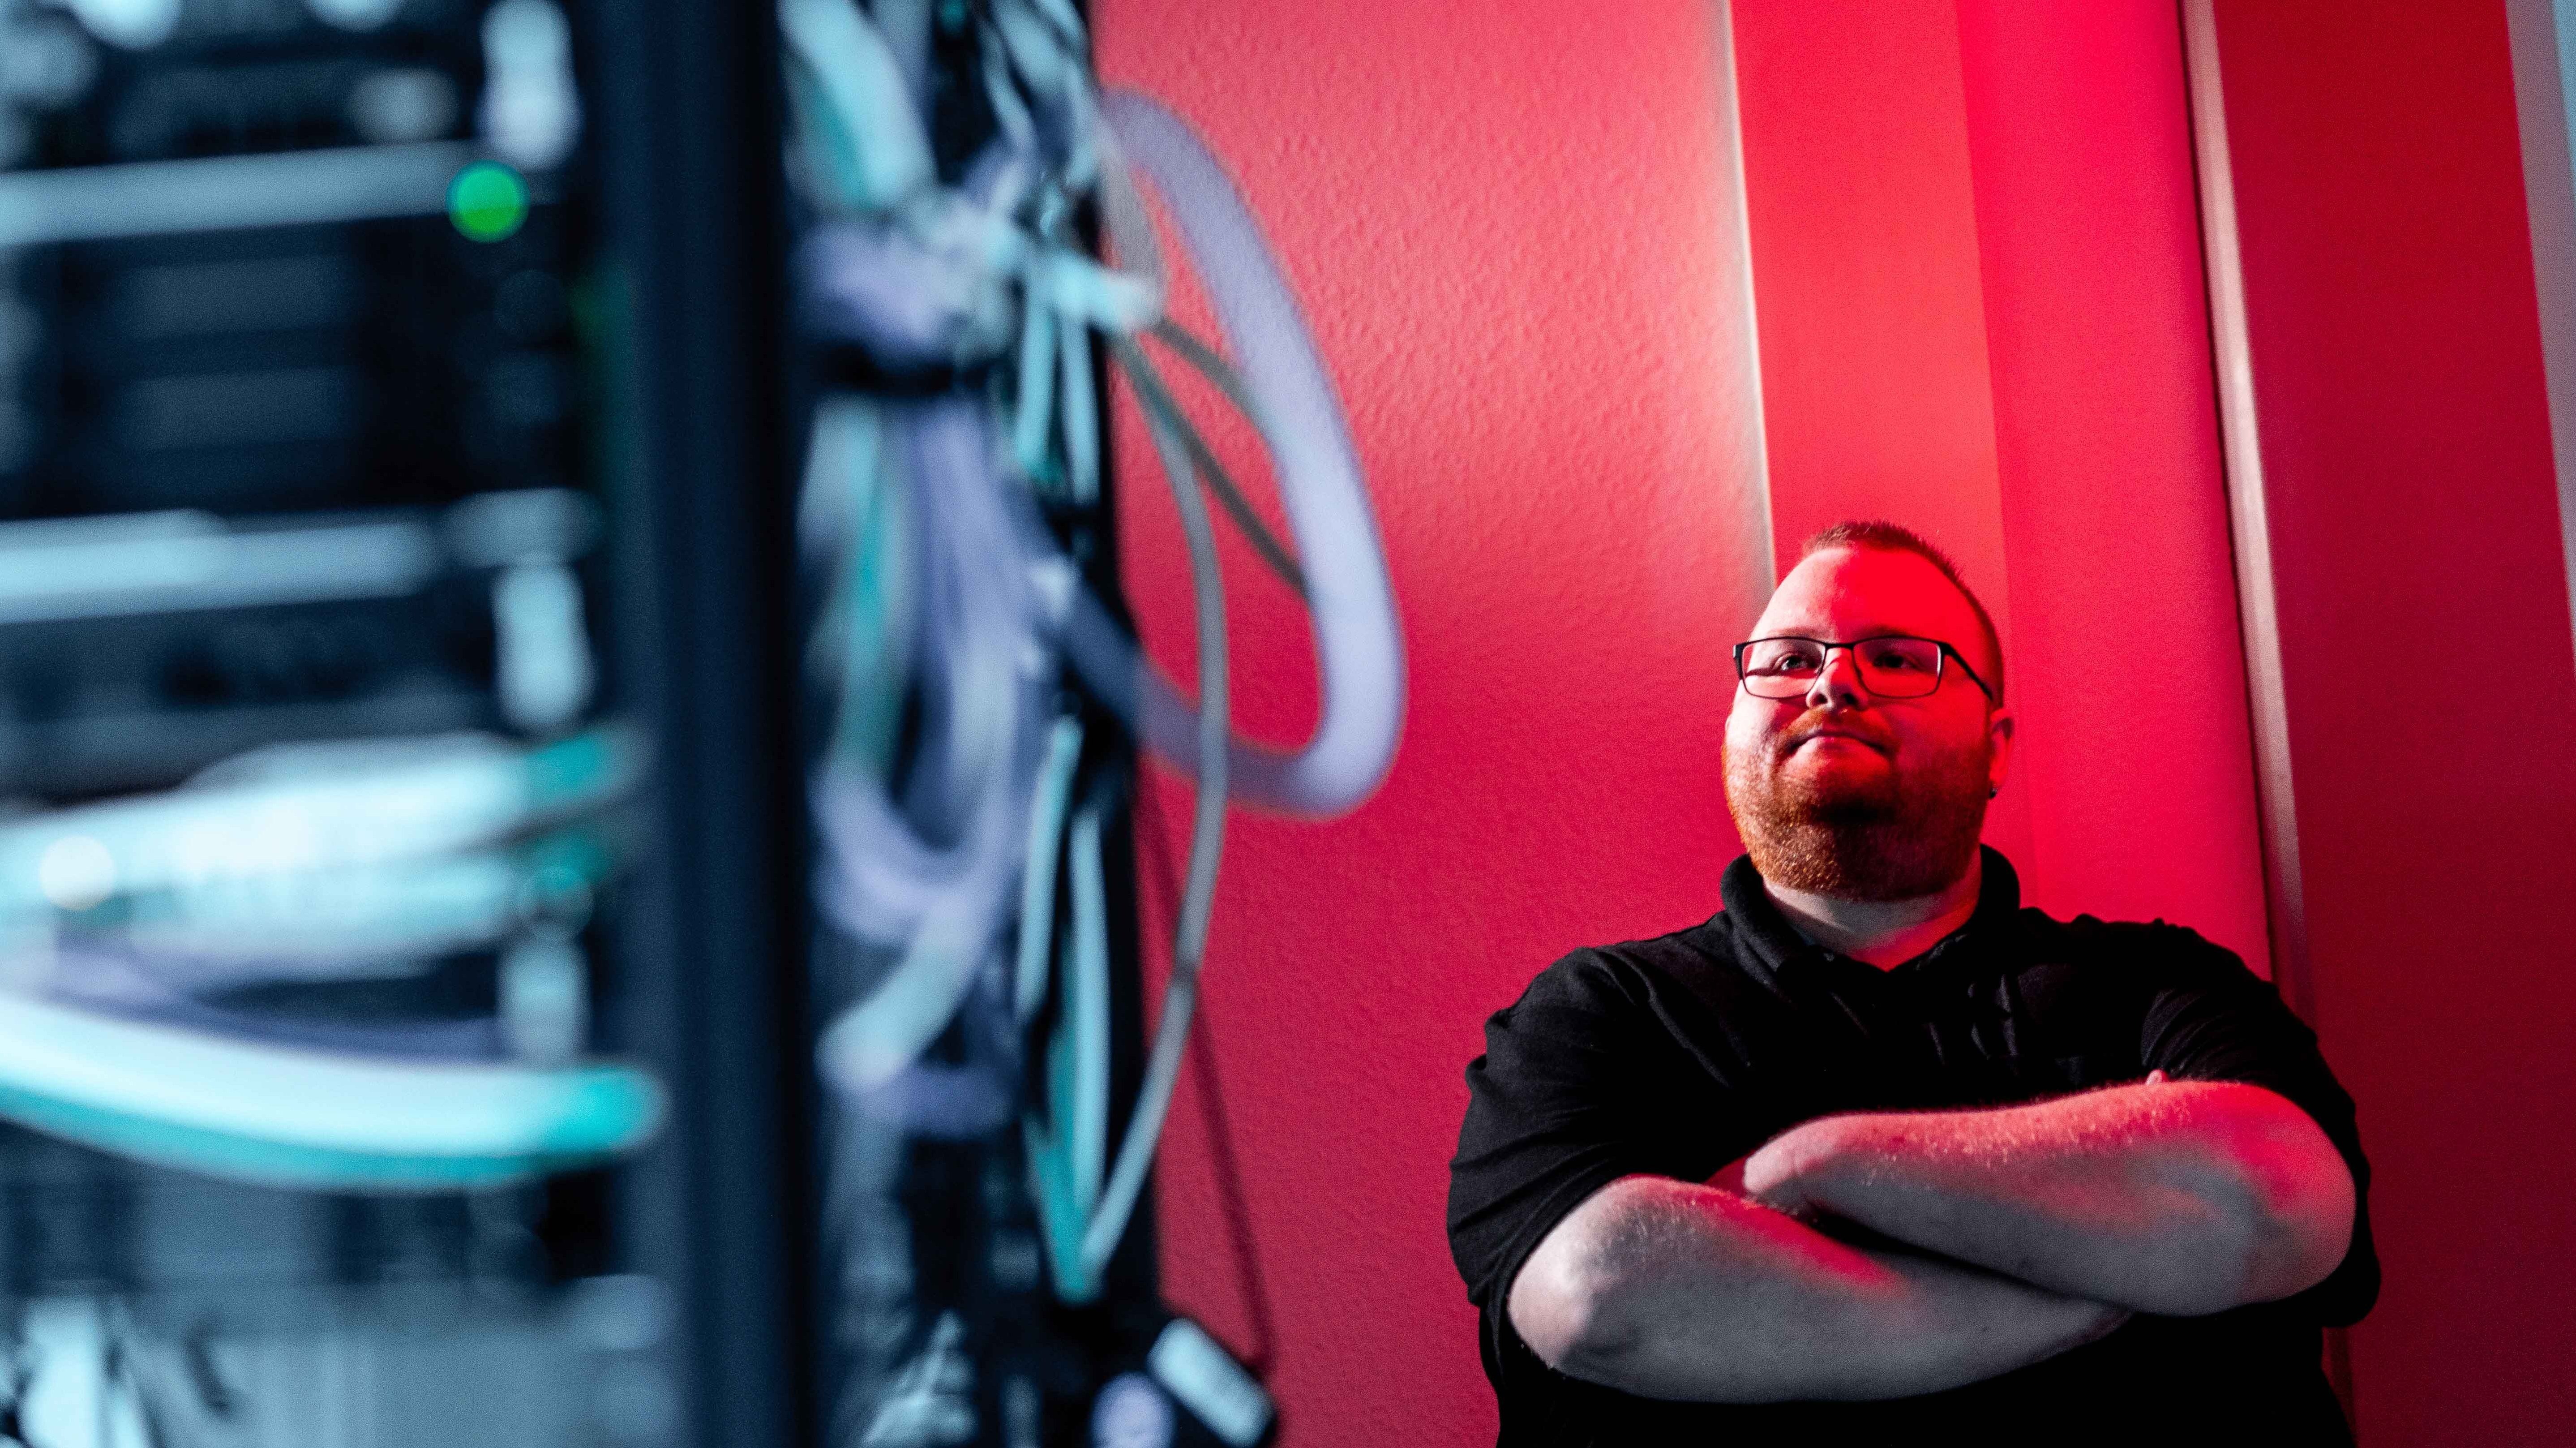 A man with glasses stands at the door of a server room, arms crossed. Red light can be seen in the background. He looks at the server racks on the left side of the picture.